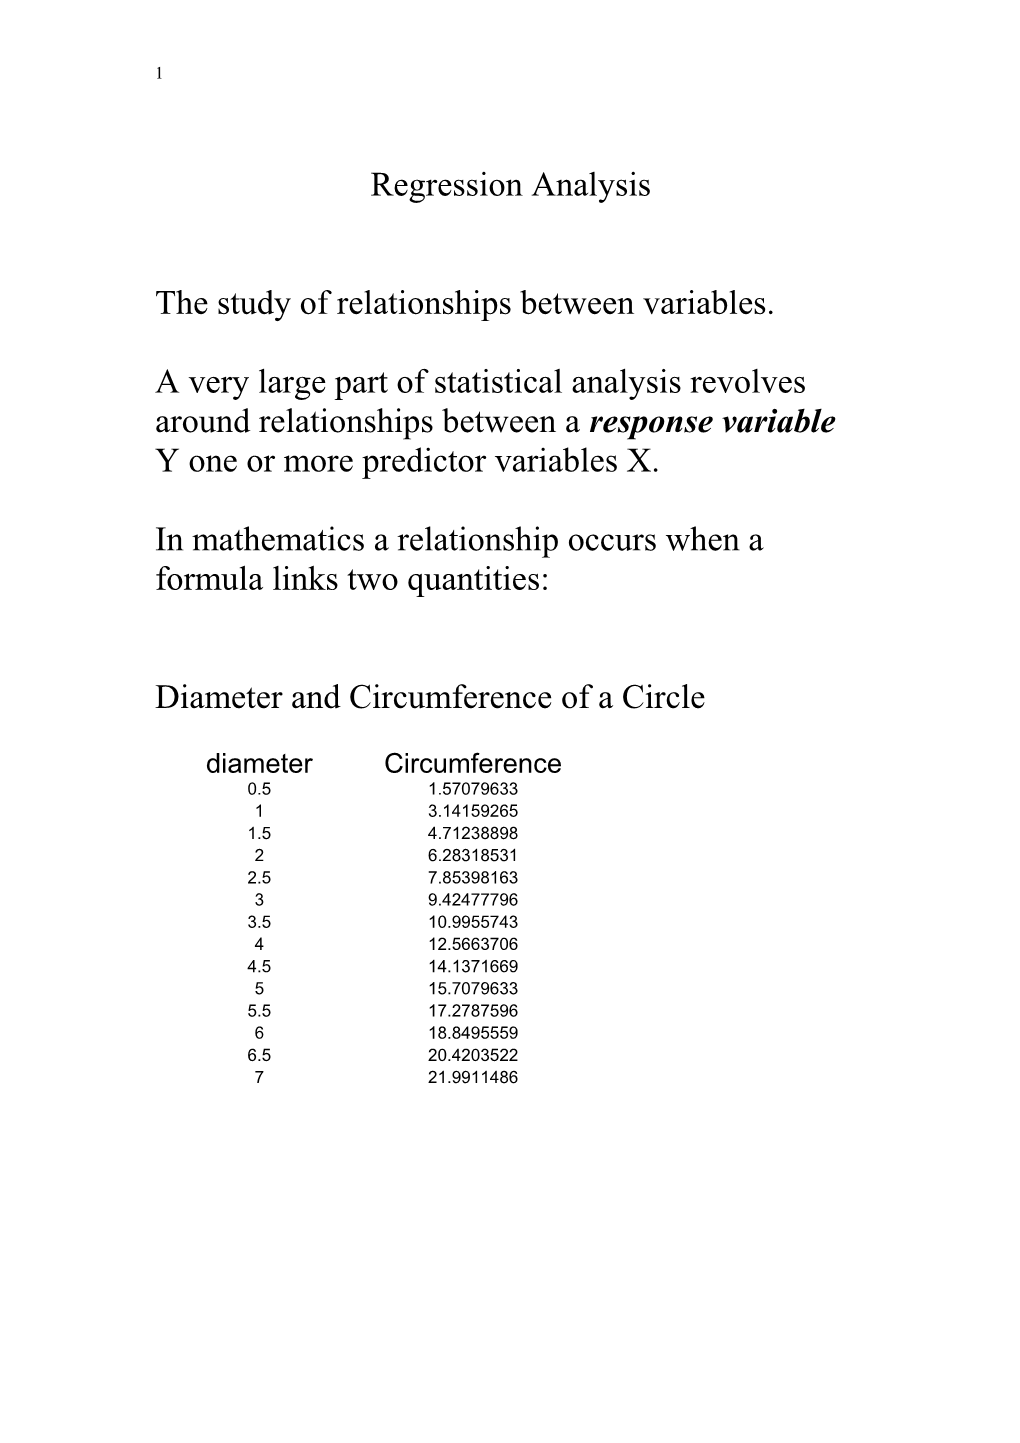 The Study of Relationships Between Variables